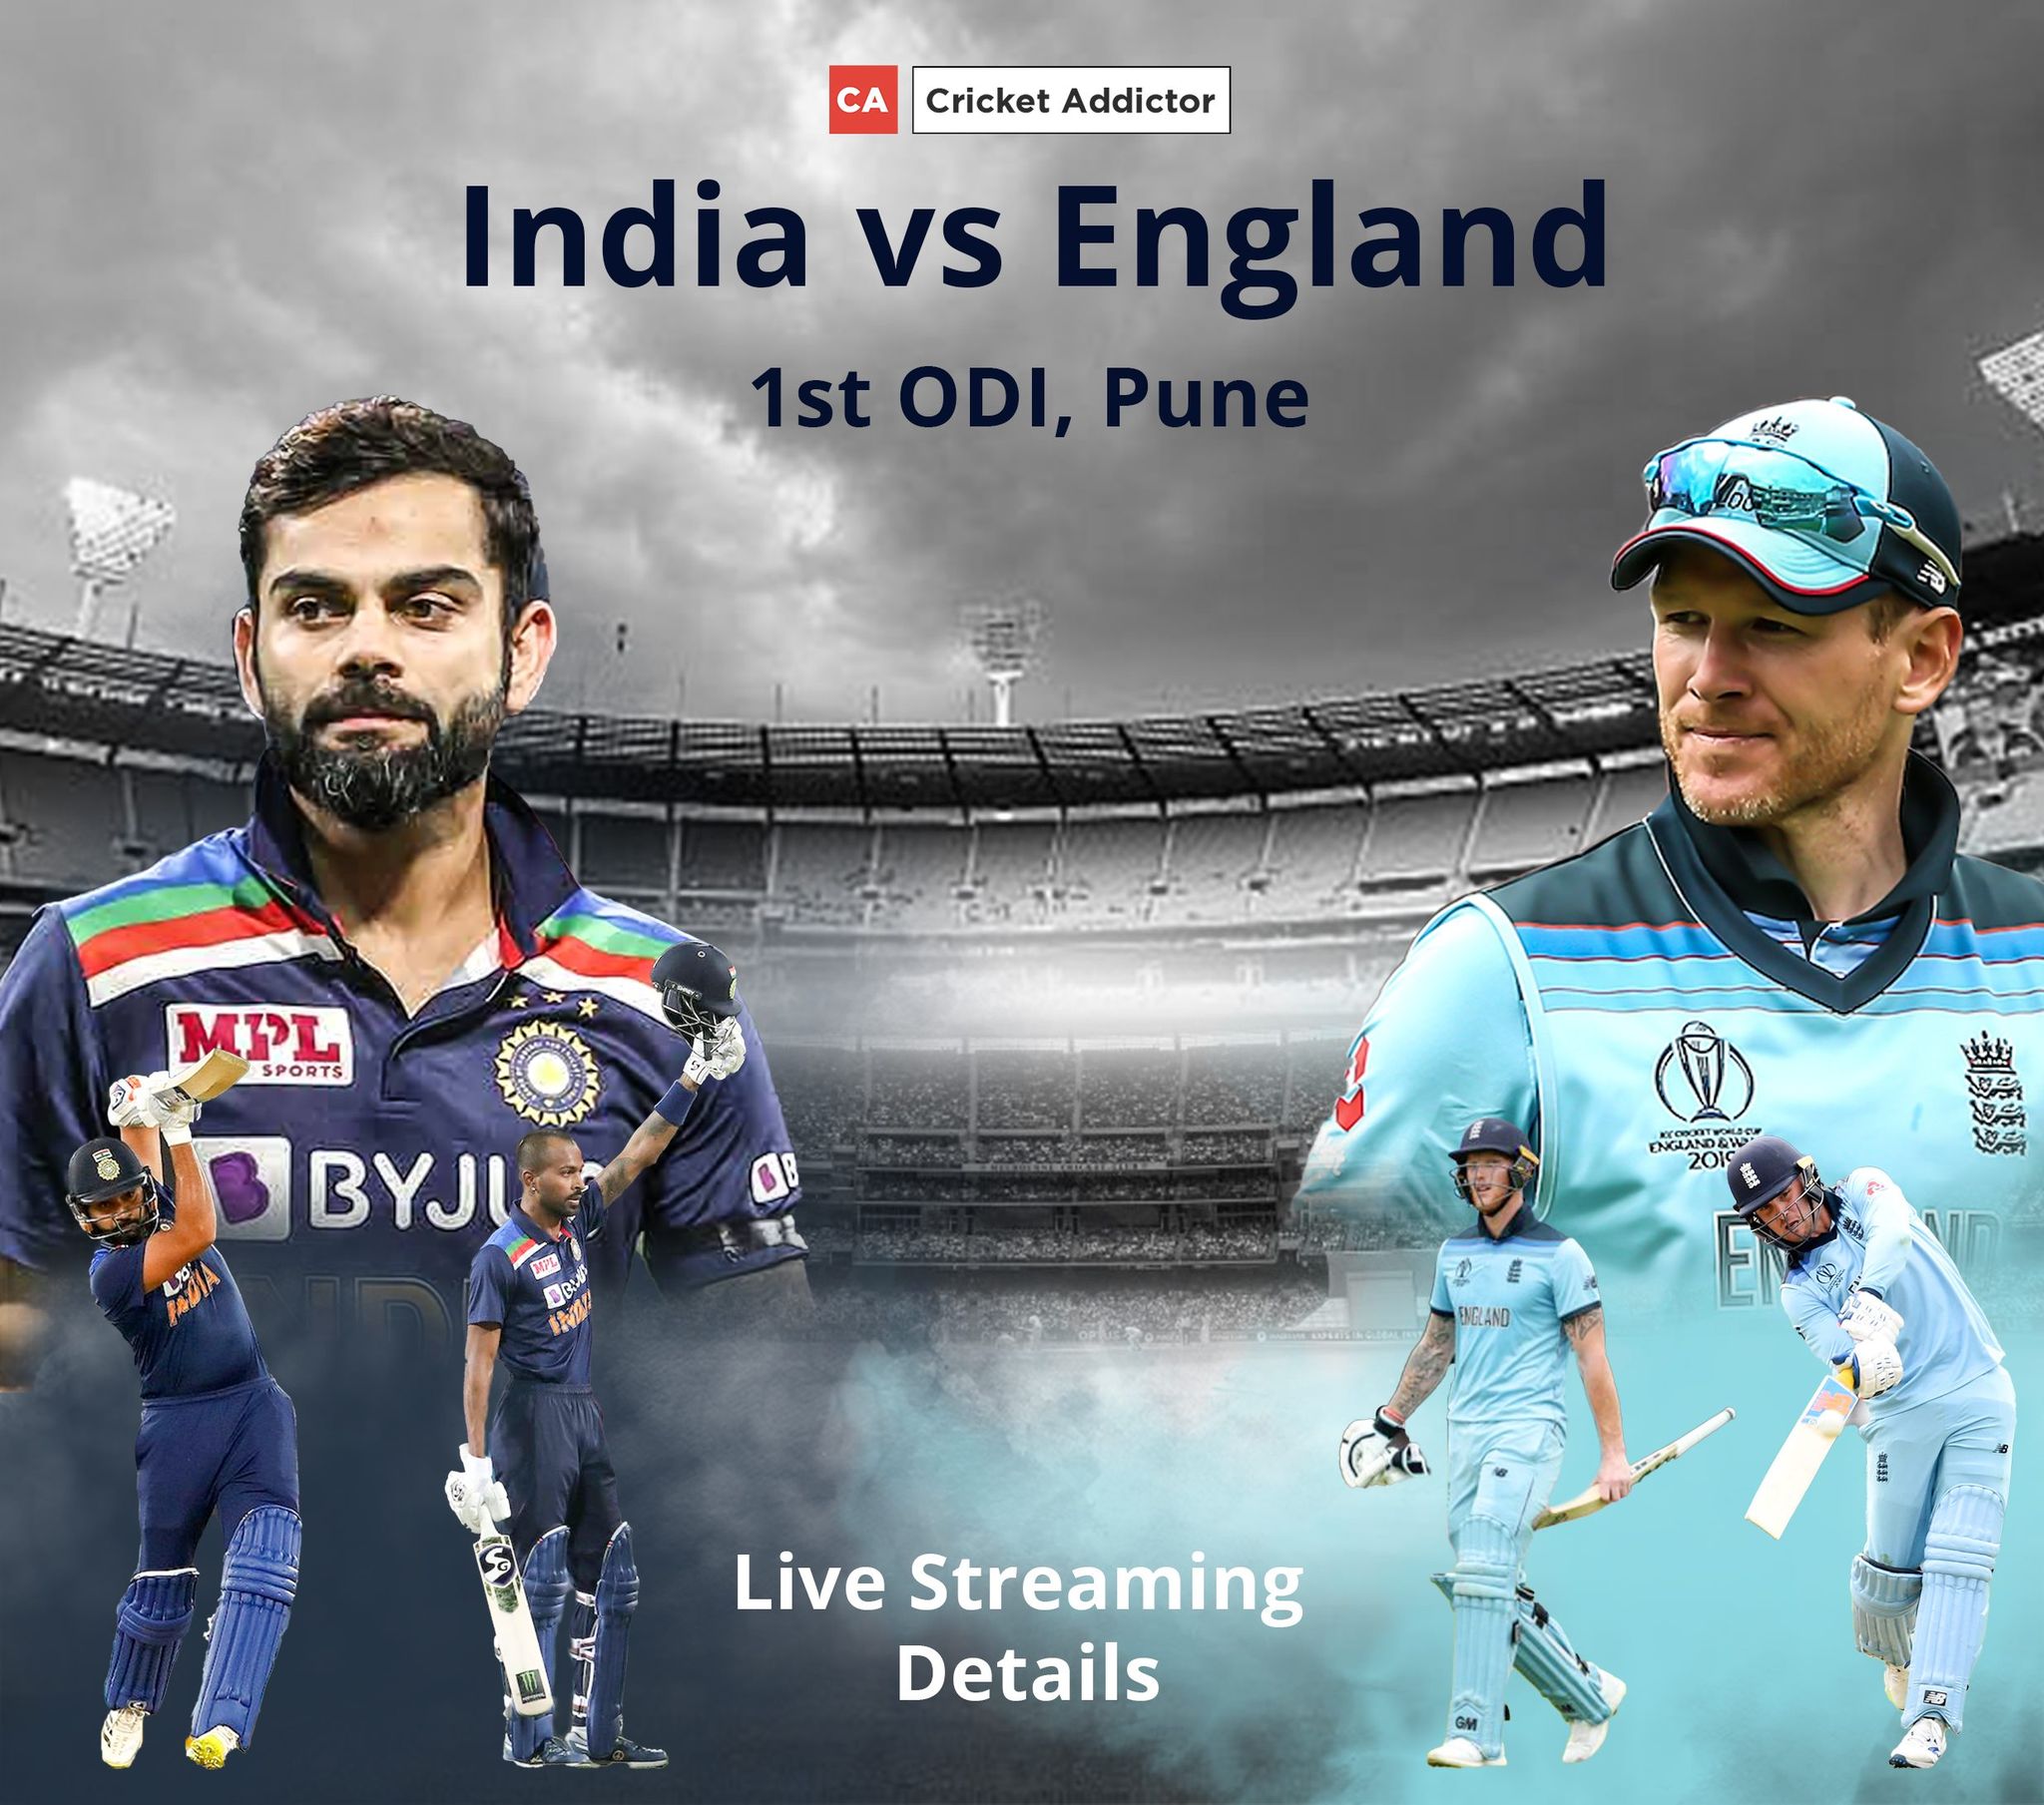 India vs England 2021, 1st ODI: When And Where To Watch, Live Streaming Details